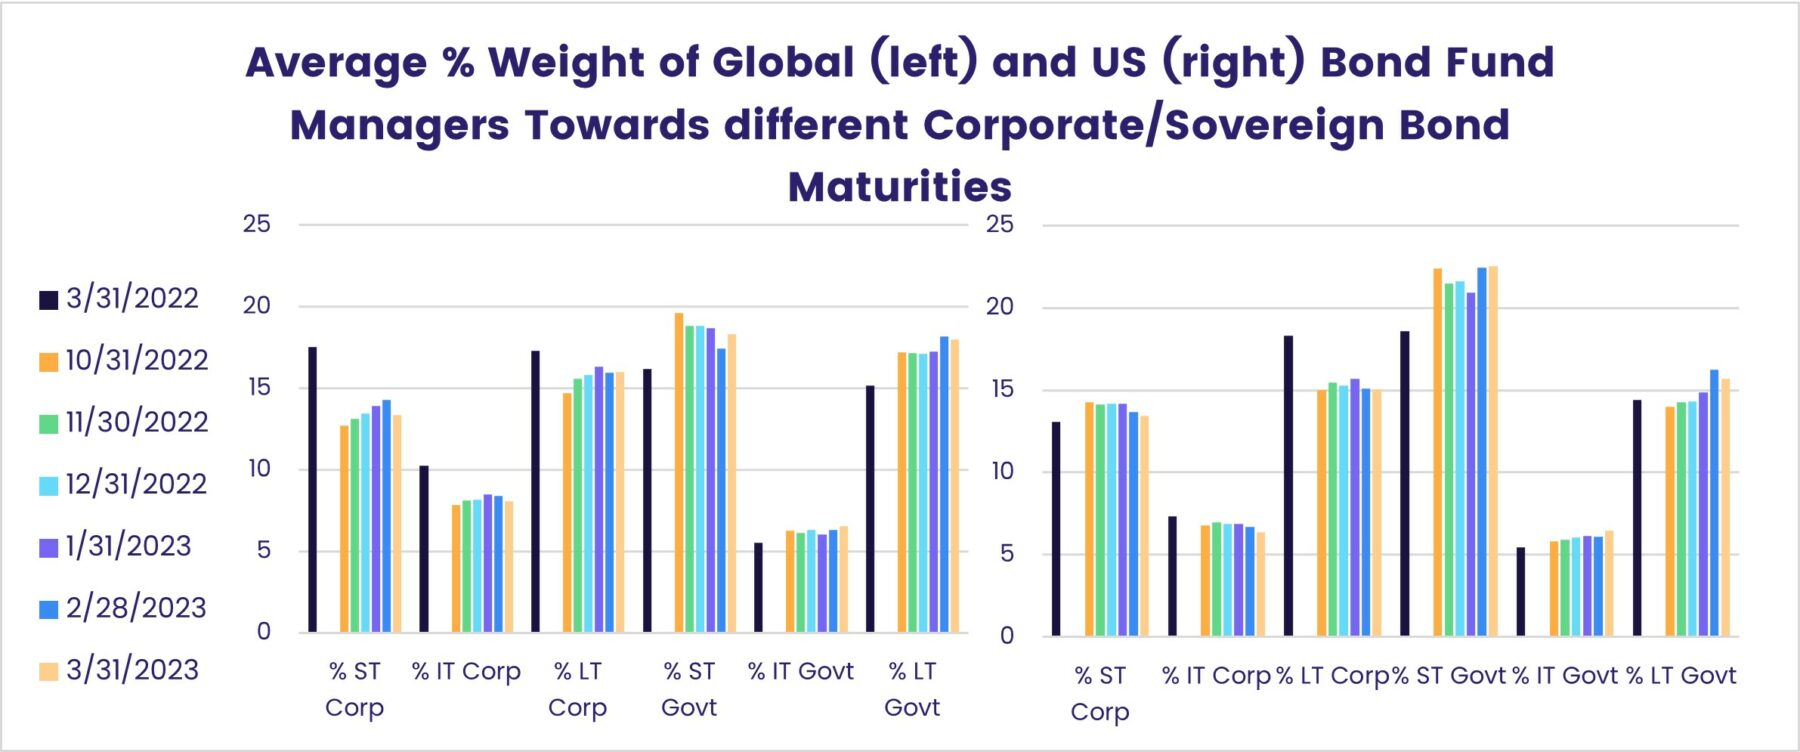 Image of a chart representing "Average % Weight of Global (left) and Us (right) Bond Fund Managers Towards different Corporate/Sovereign Bond Maturities"